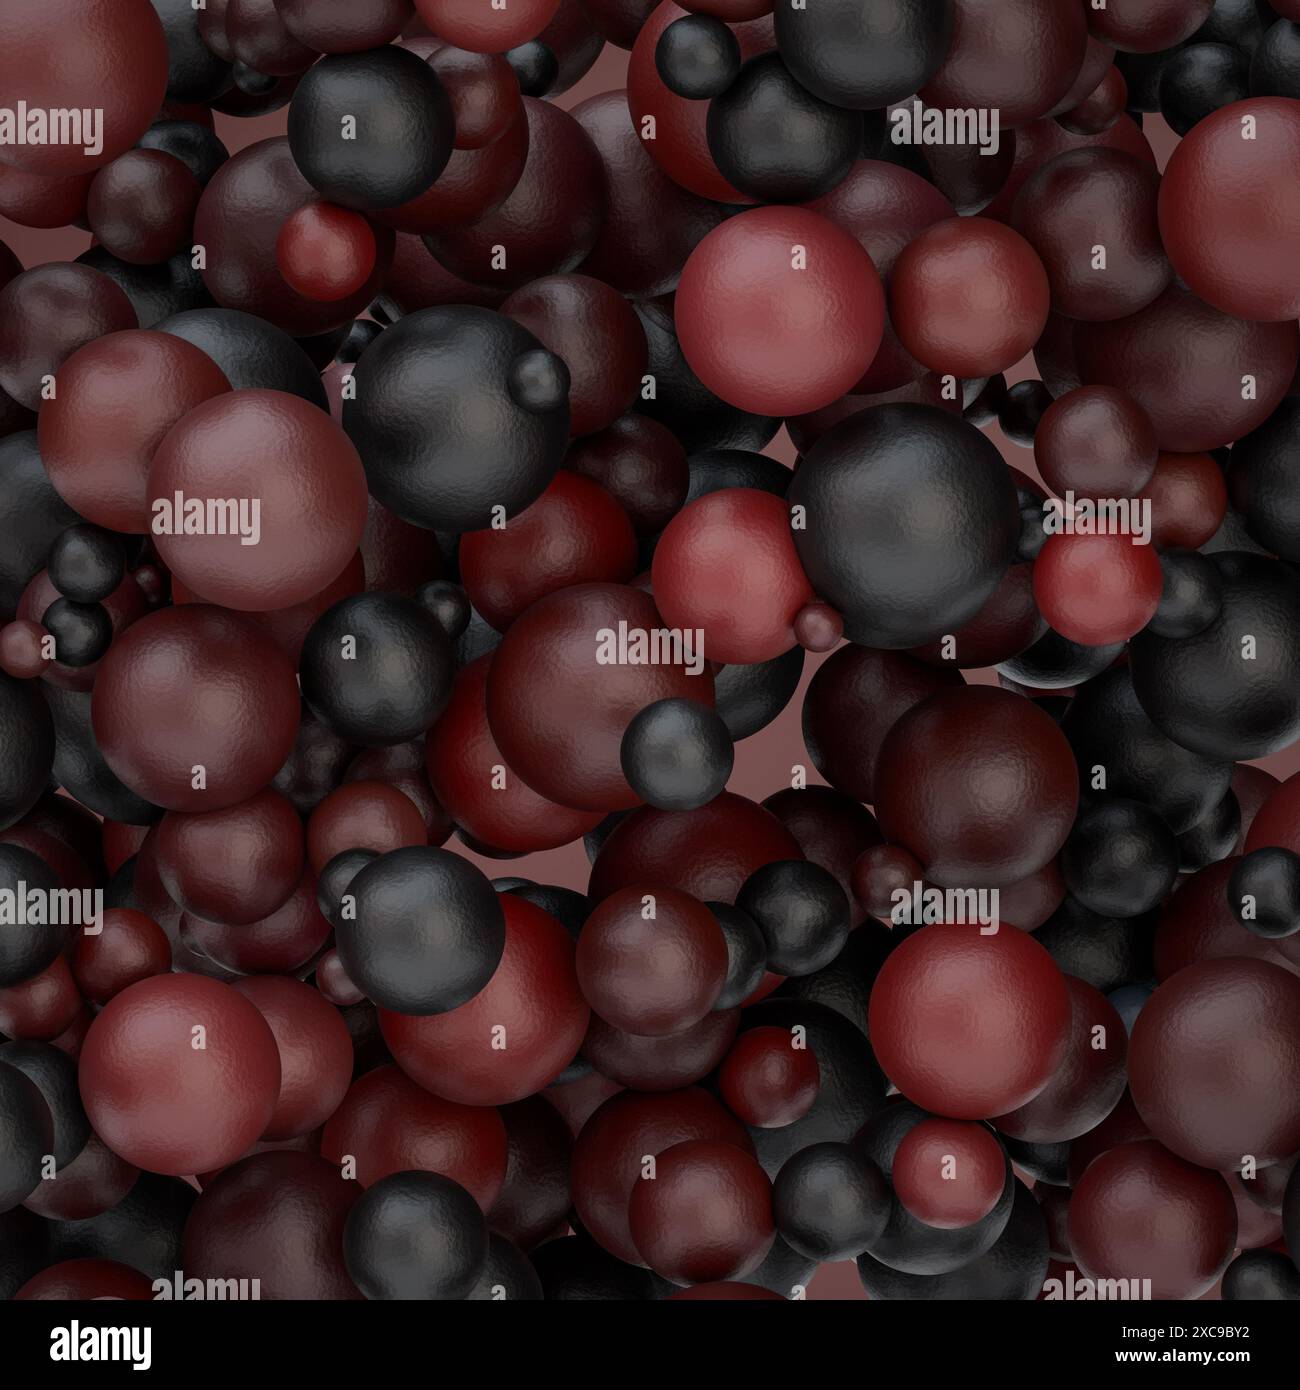 Abstract textured spheres background: dark red color scheme. Differently sized and shaded spheres hovering. Stock Photo